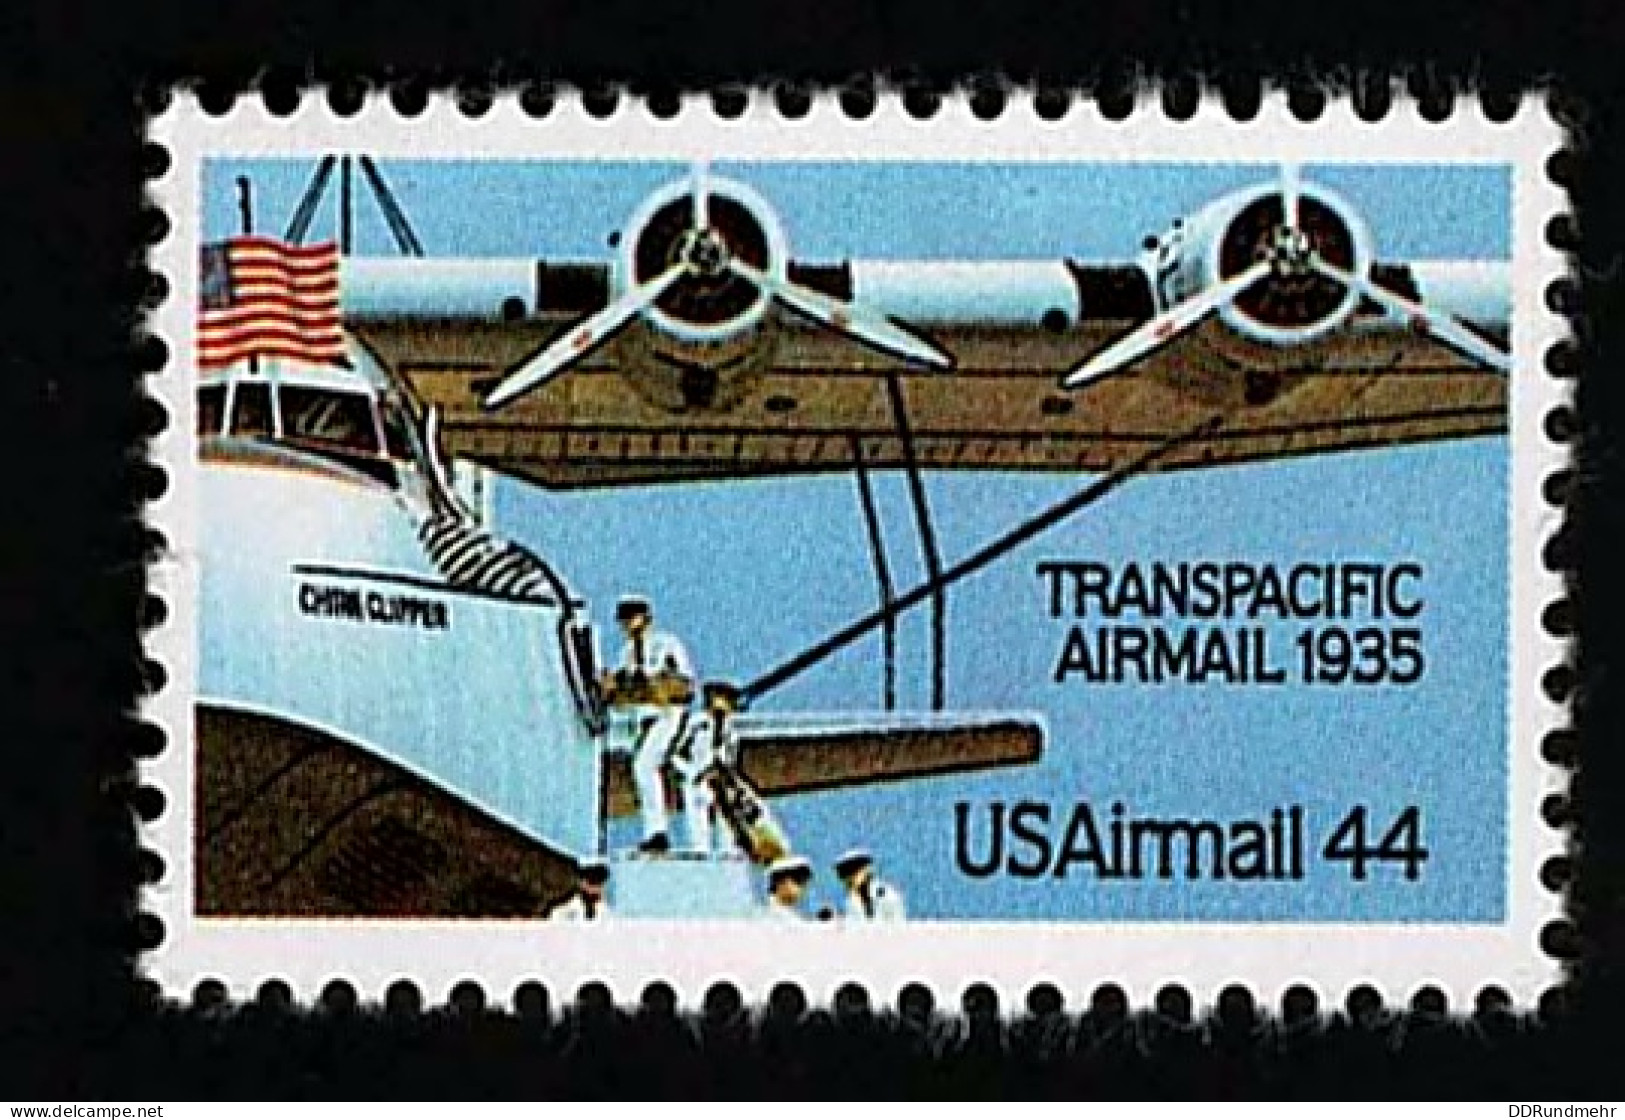 1985 China Clipper Michel US 1727 Stamp Number US C115 Yvert Et Tellier US PA109 Stanley Gibbons US A2144 Xx MNH - 3b. 1961-... Unused